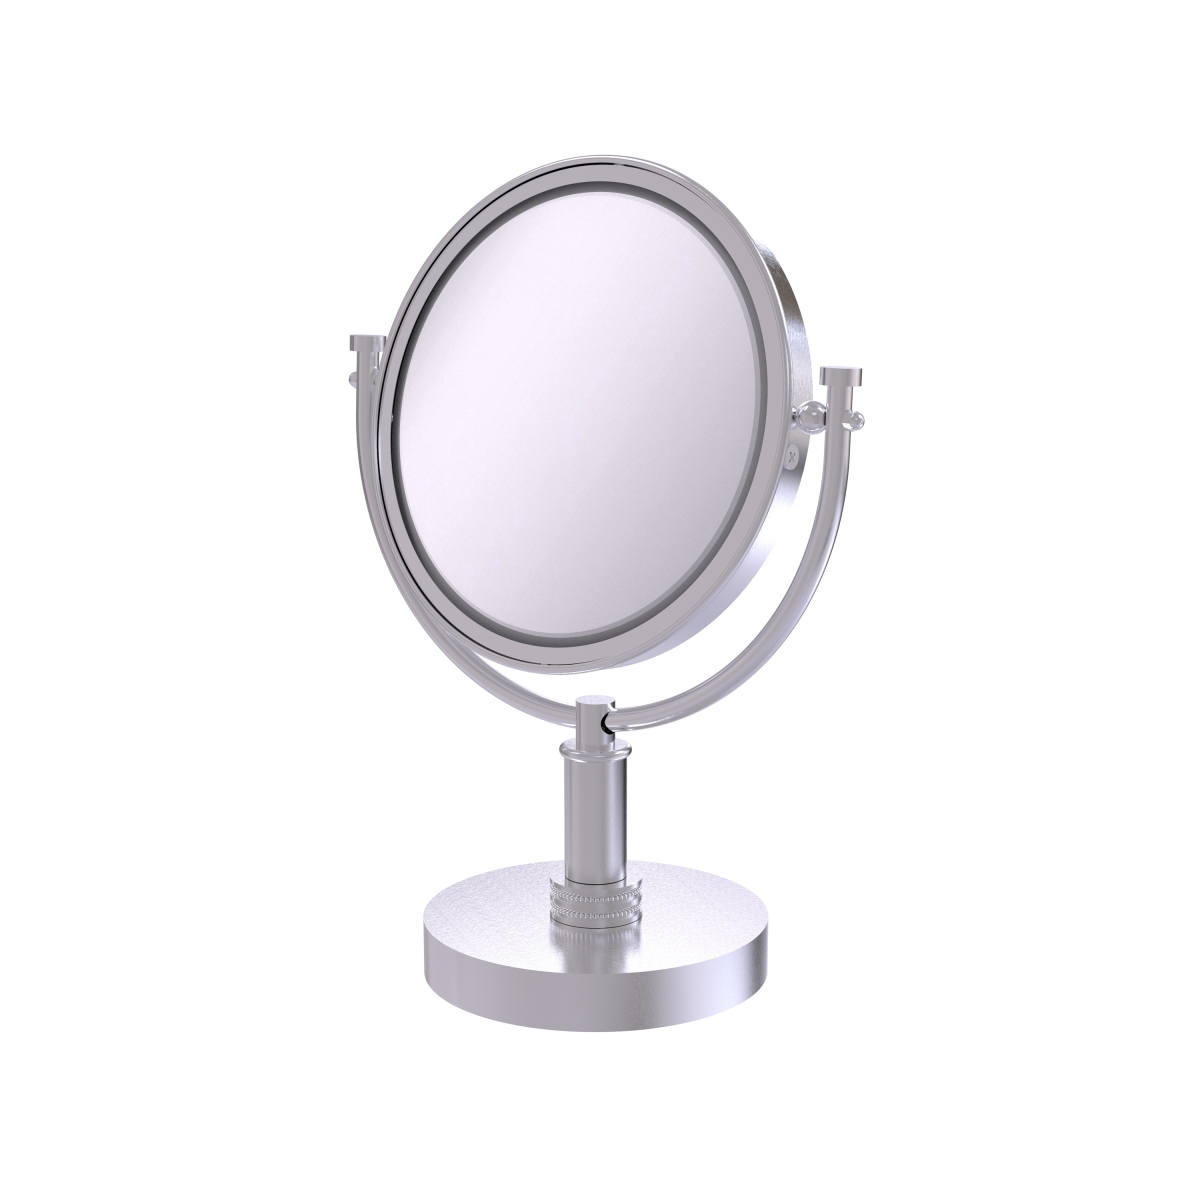 Picture of Allied Brass DM-4D-5X-SCH 8 in. Vanity Top Make-Up Mirror 5X Magnification, Satin Chrome - 15 x 8 x 8 in.